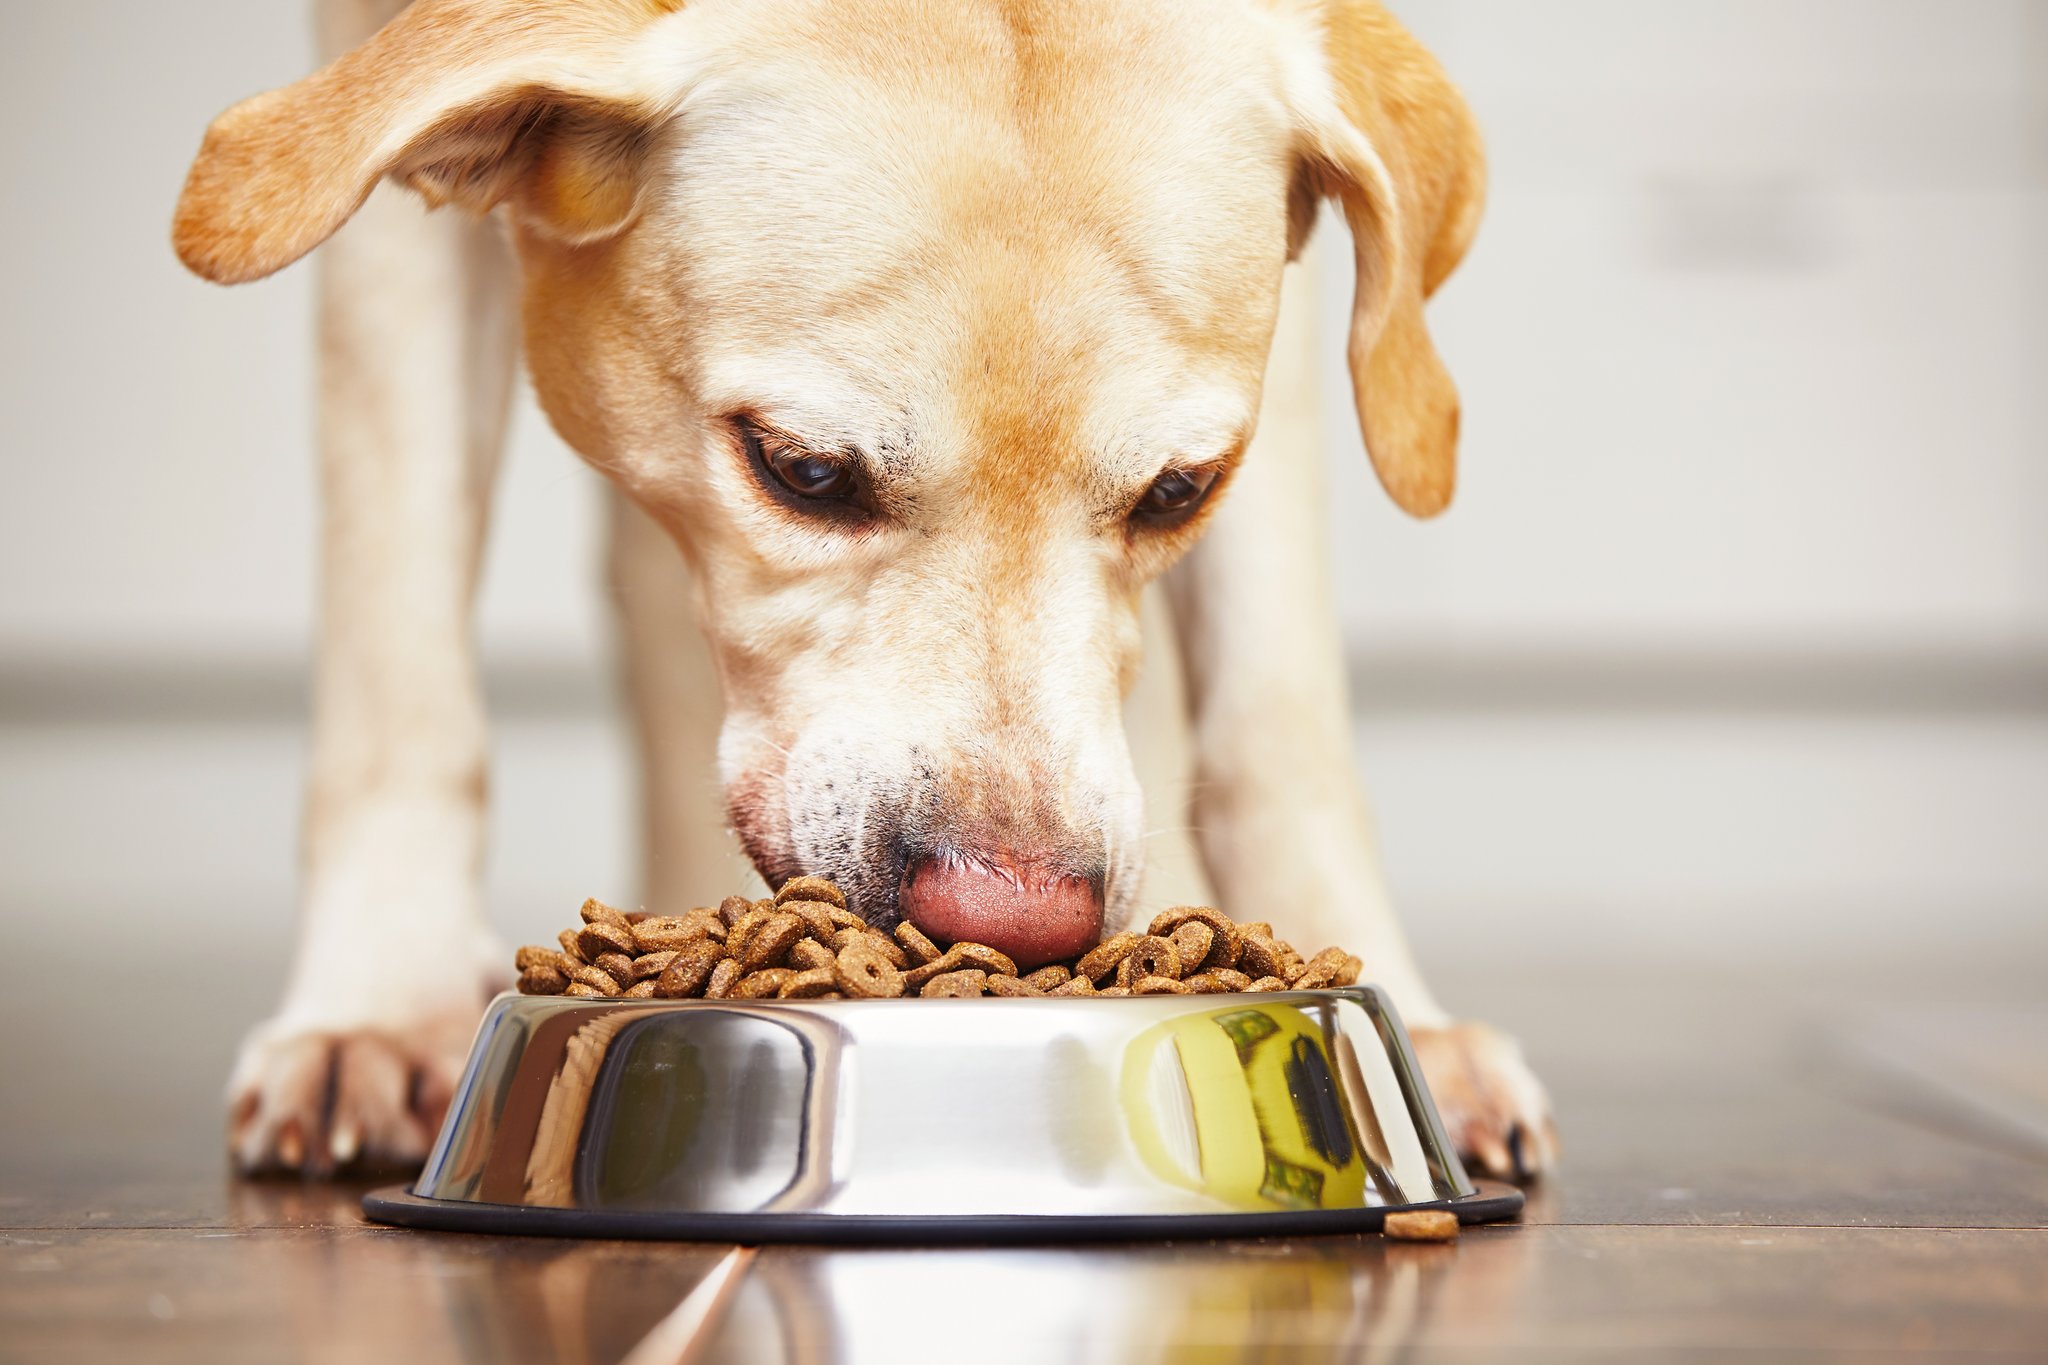 What Diet For Dogs With Severe Congestive Heart Failure